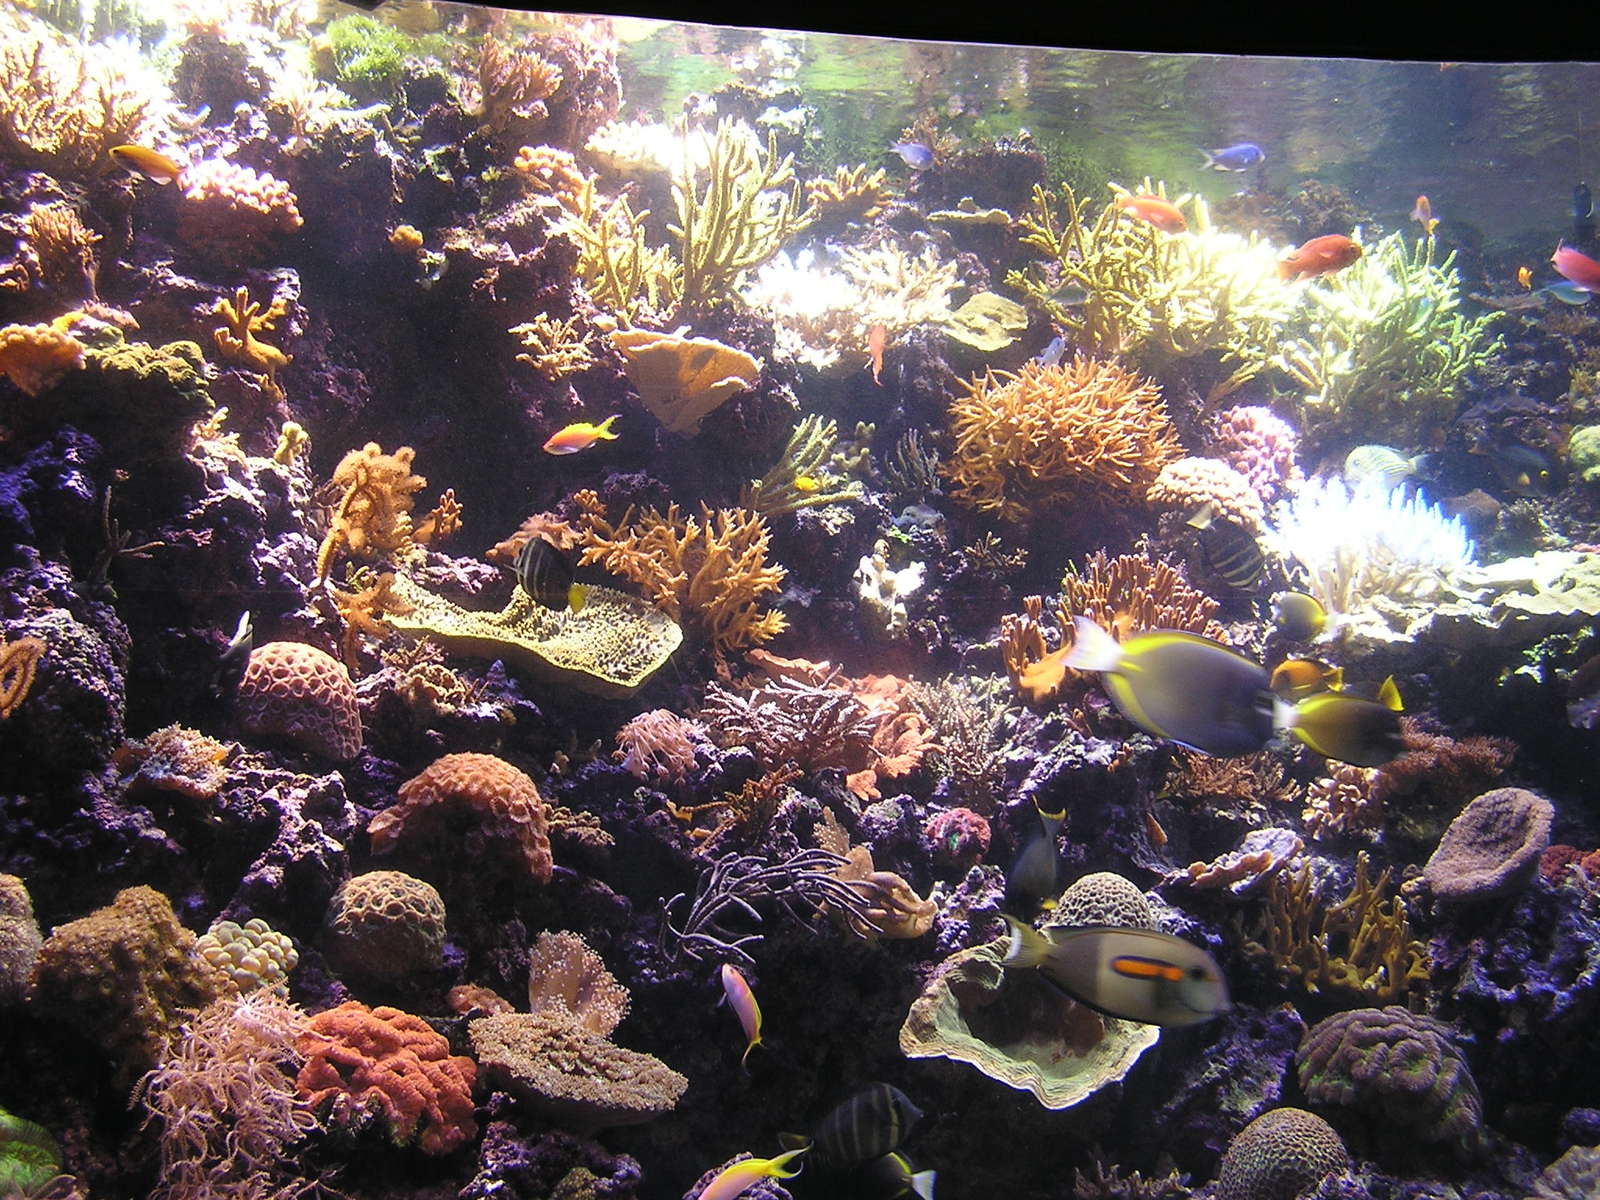 many colorful fish swimming in the water above a coral reef